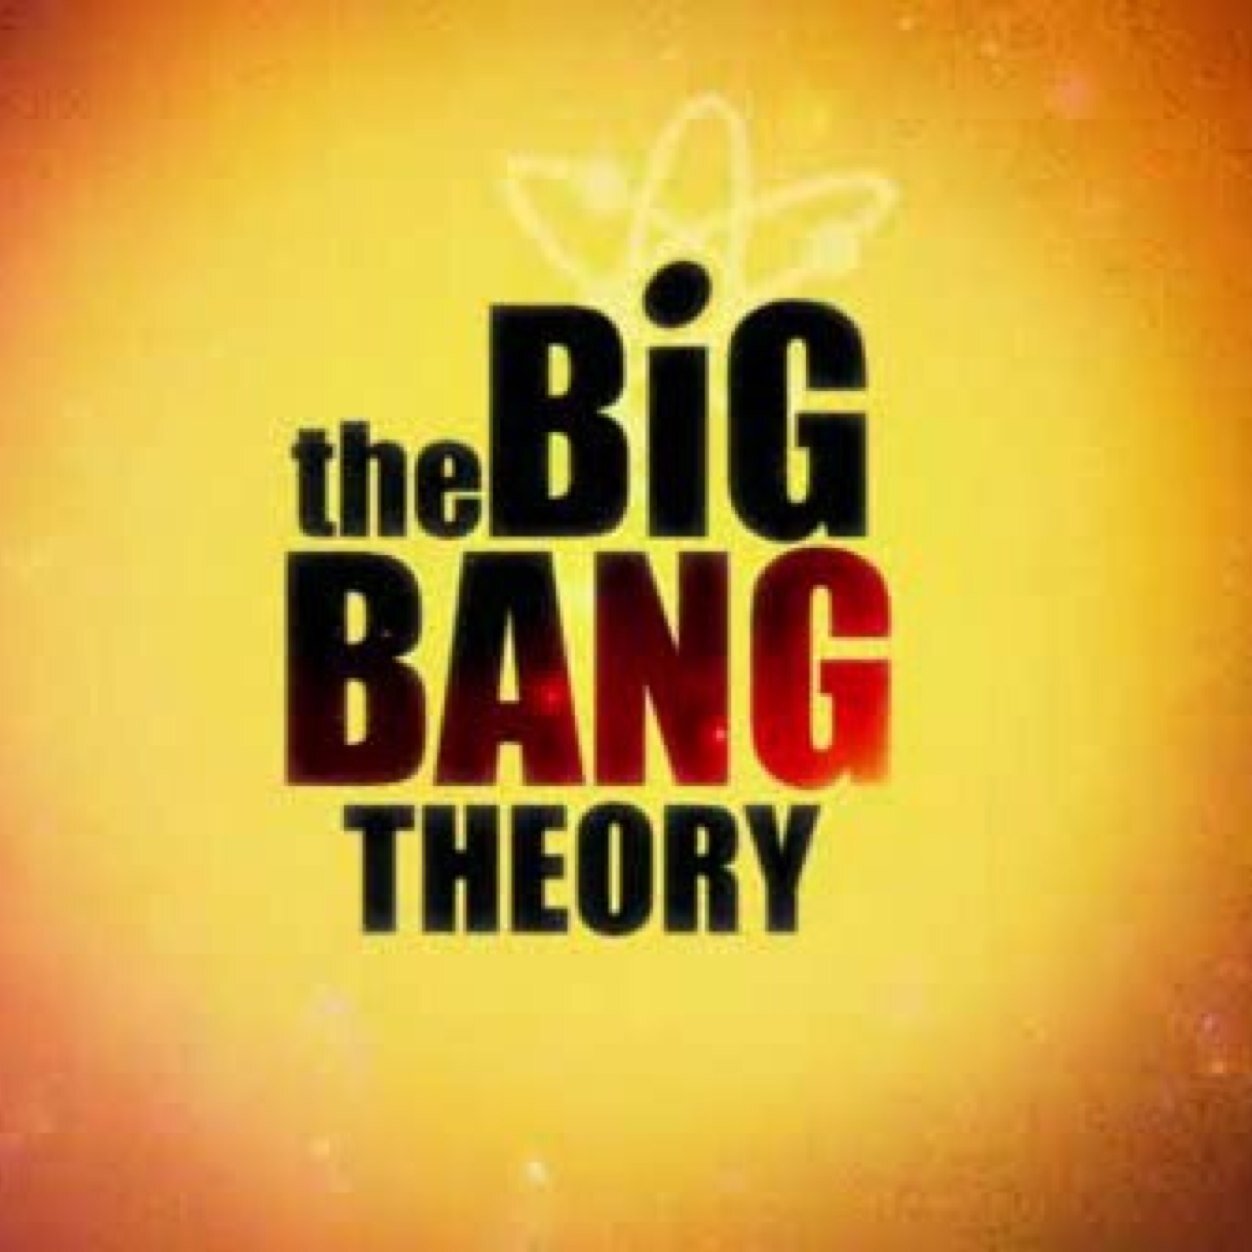 You can get all the Big Bang theory scoops right here!